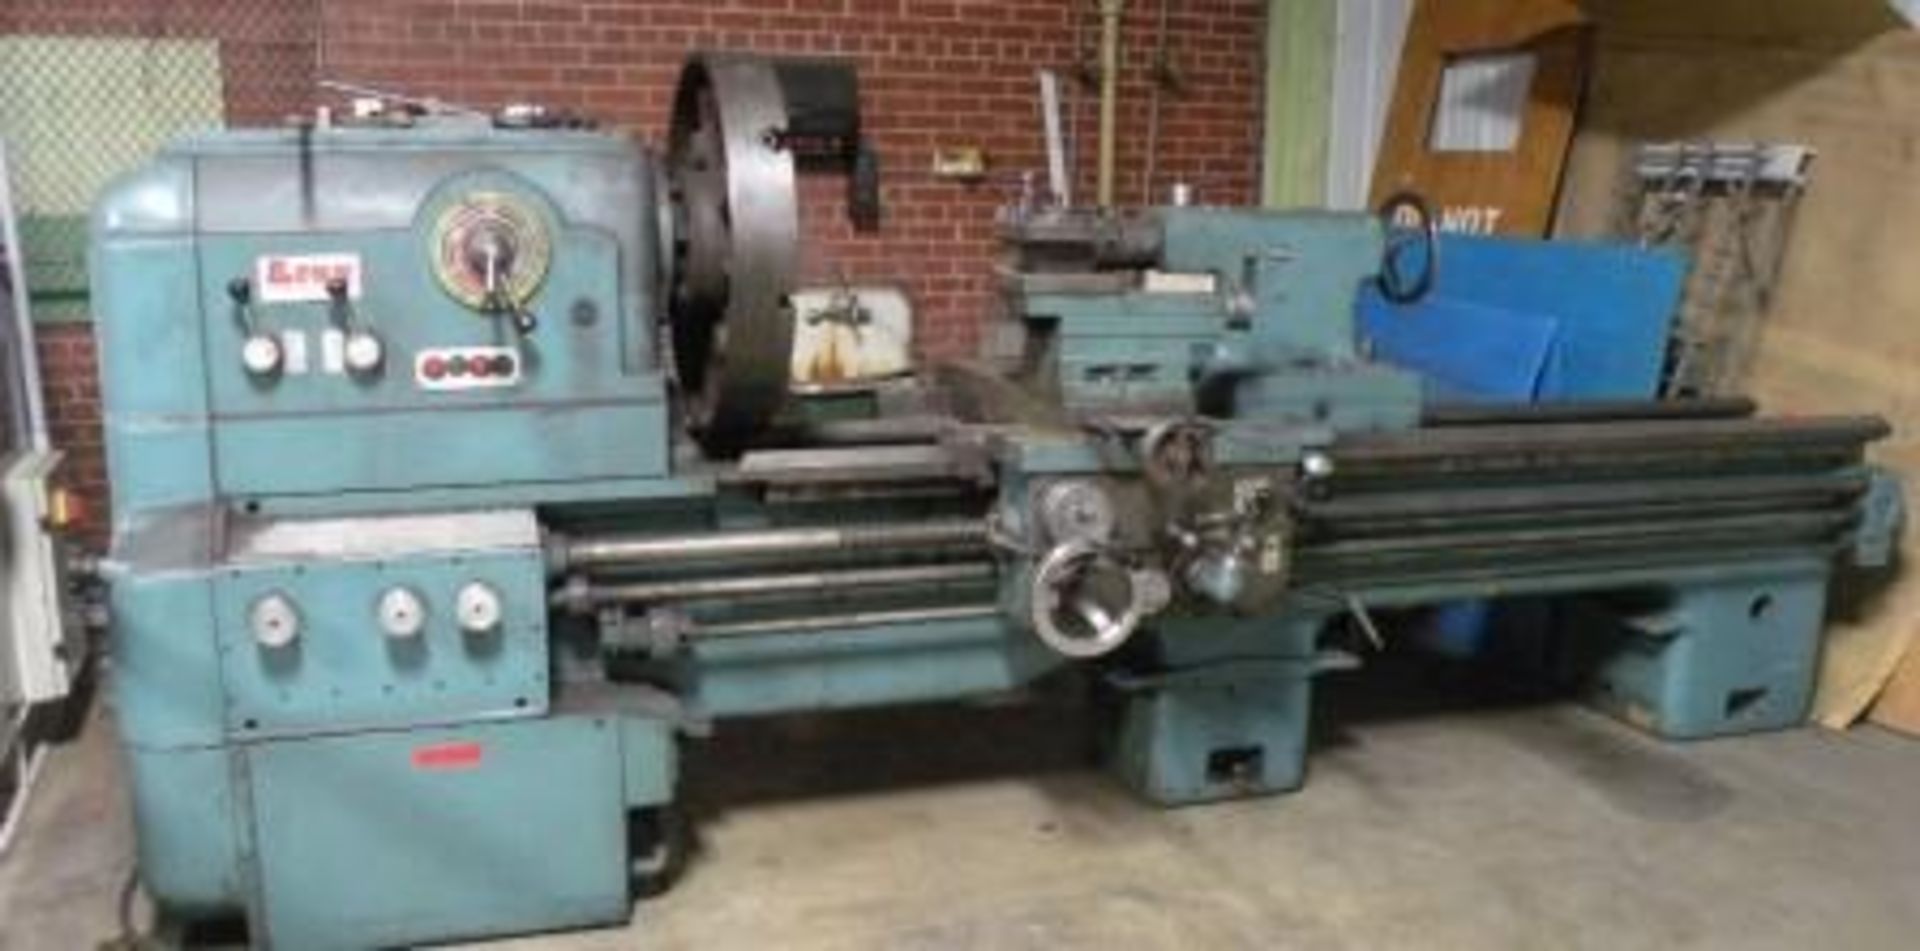 Universal Lion Engine Lathe: 32" Sw x 96" Centers, 42" in (Free Loading)(Union City, TN) - Image 2 of 7